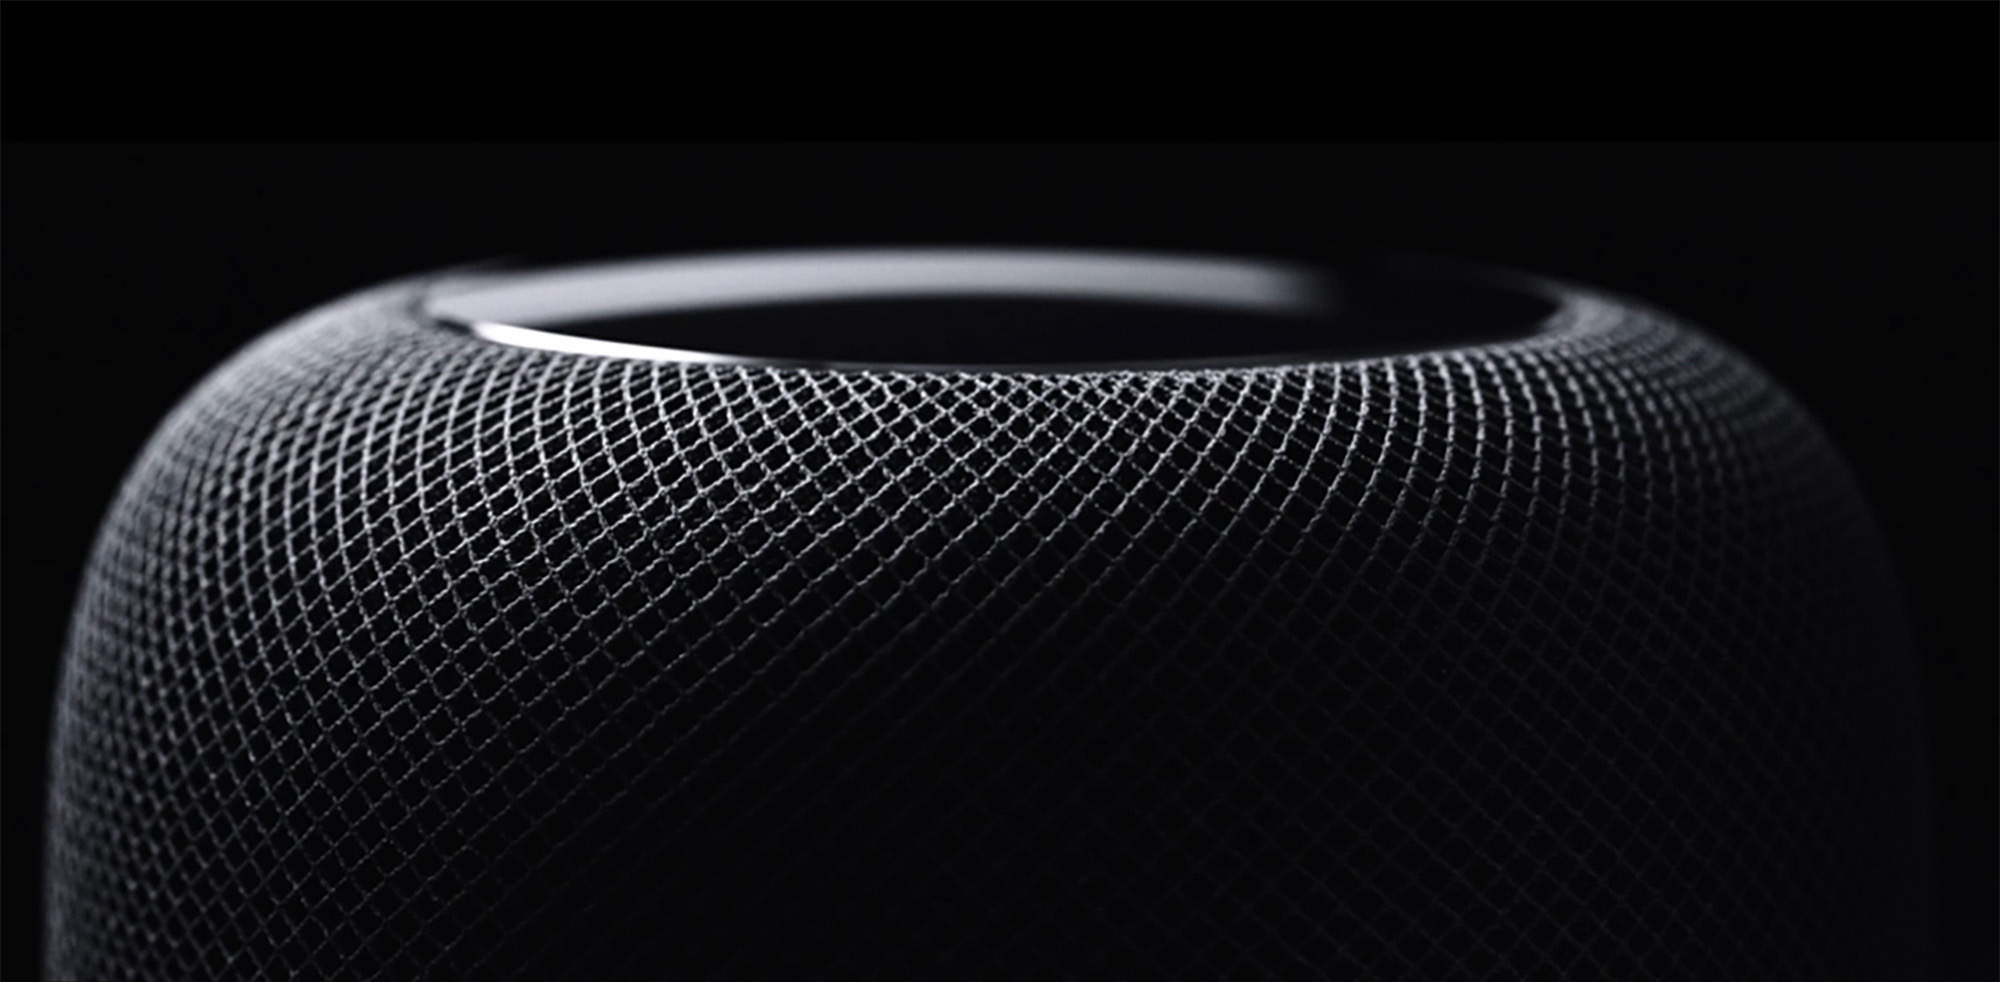 Apple HomePod by Mark Mathosian under Creative Commons License